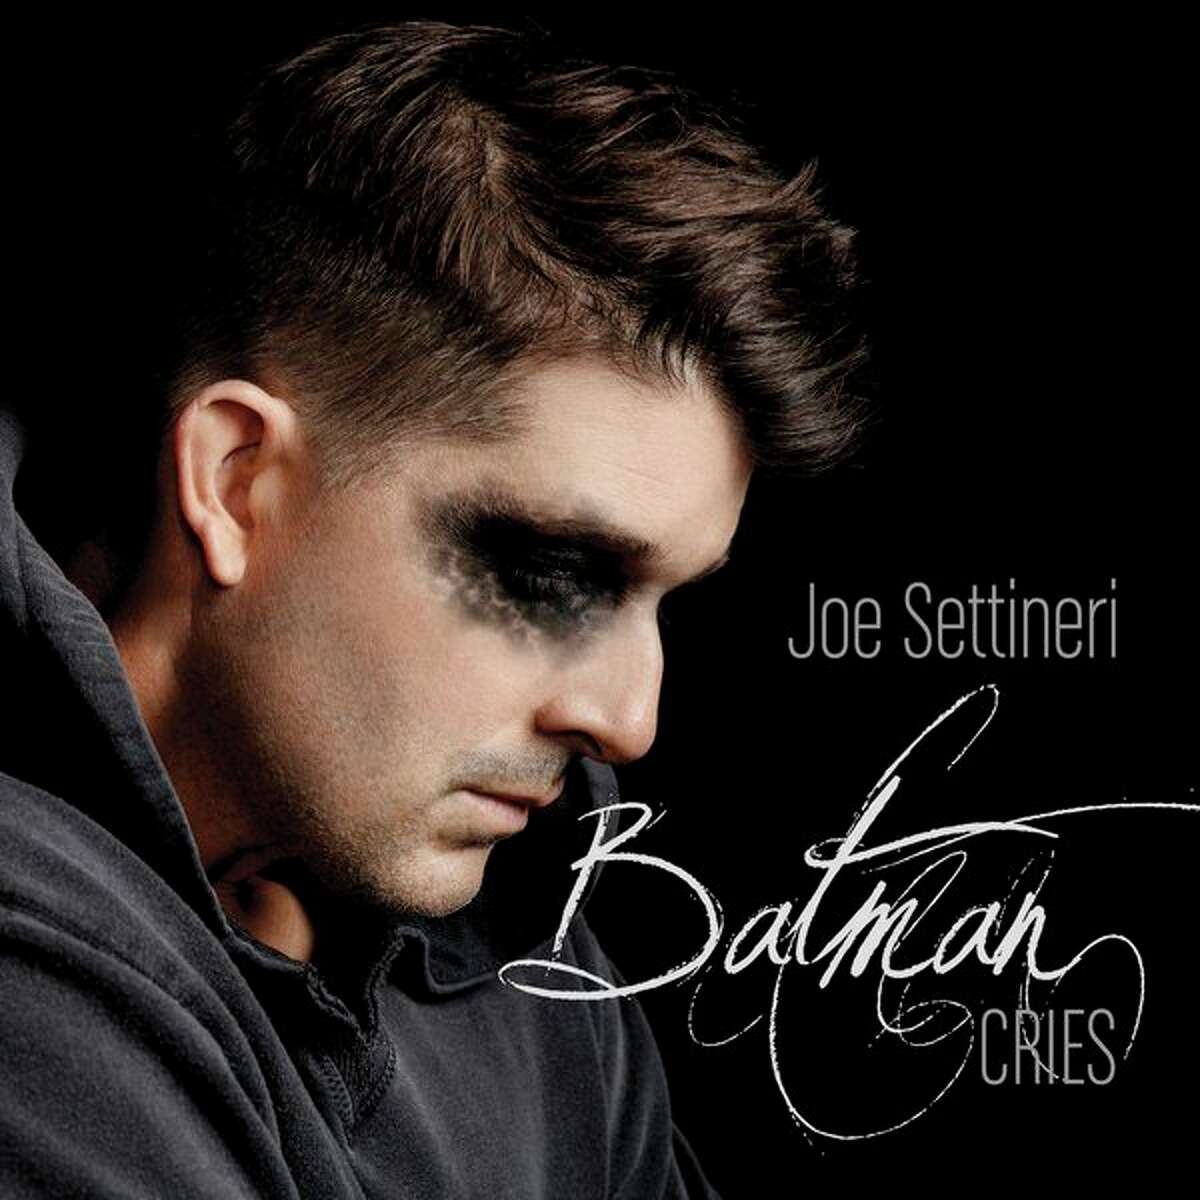 For Midland native Joe Settineri has released his newest song, 'Batman Cries.' The single deals with the inner battle many have within themselves. (photo provided) 